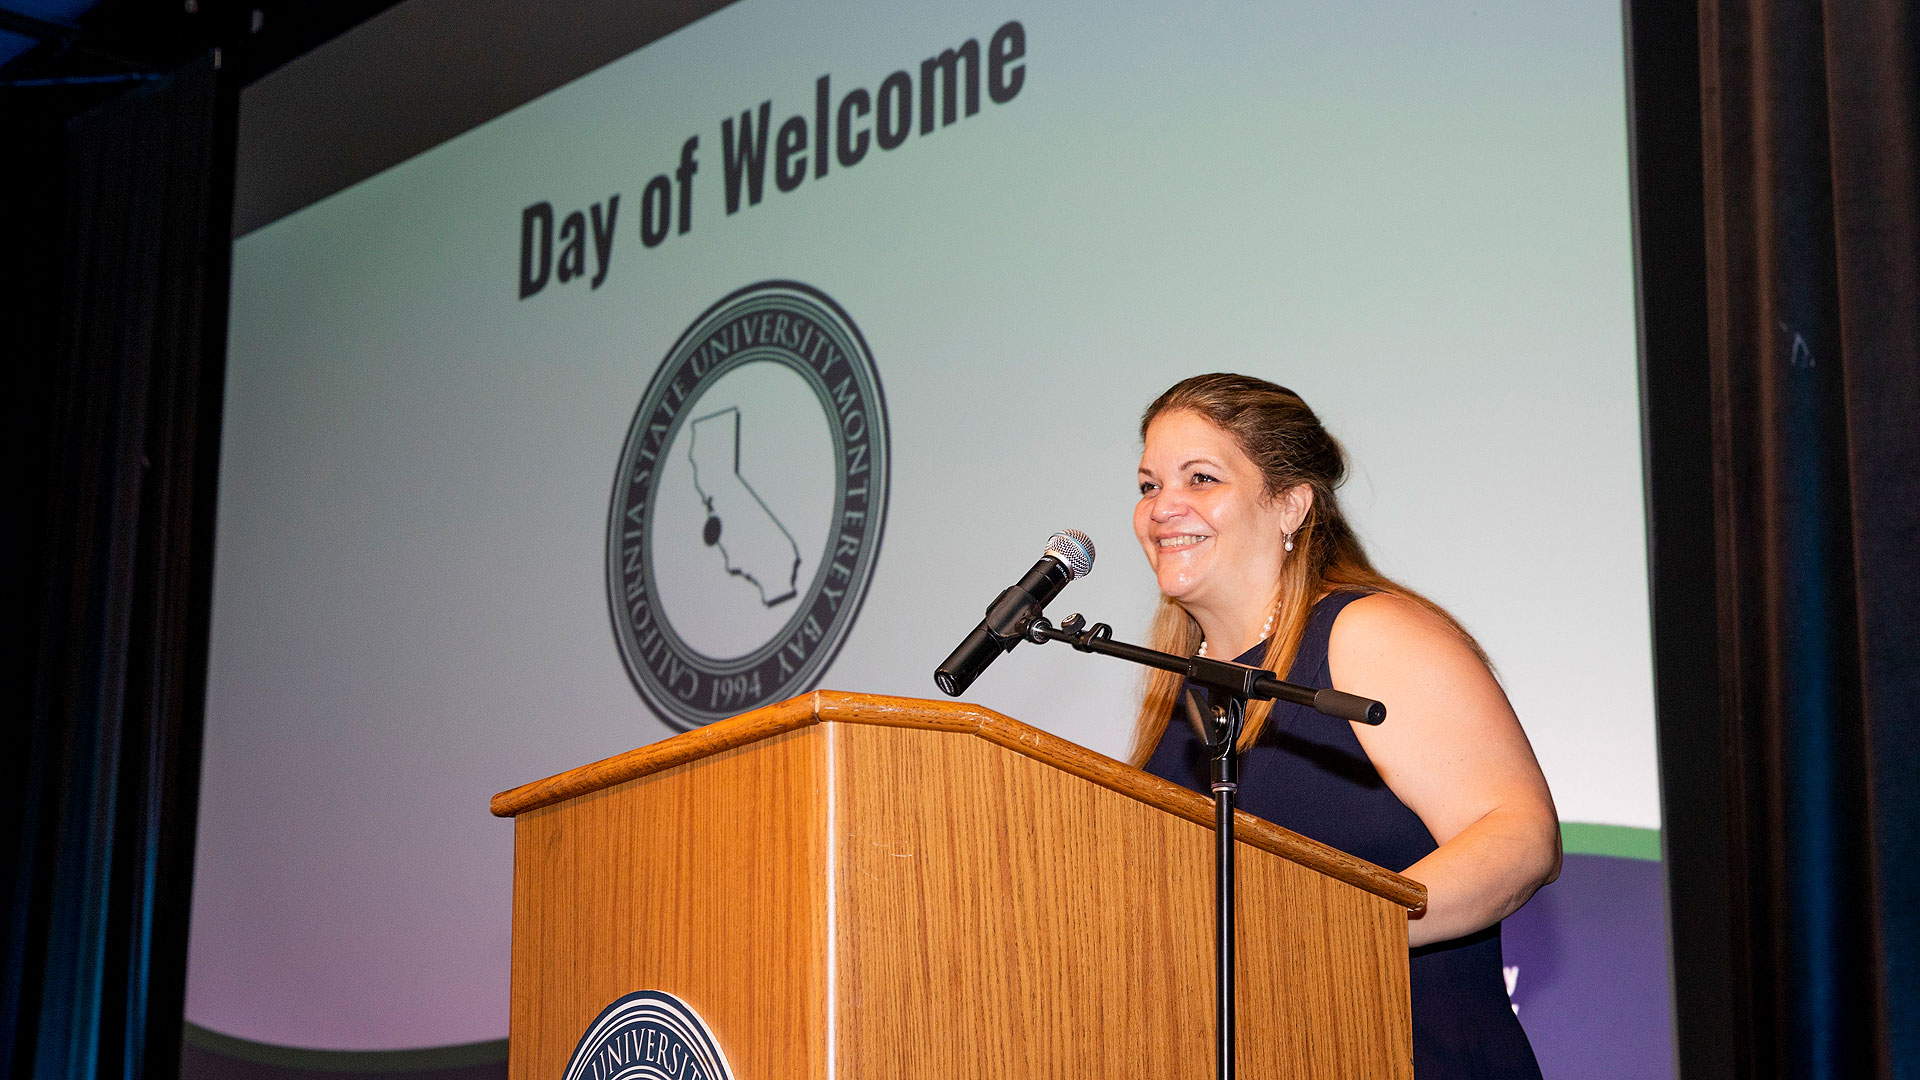 President Quiñones at a podium speaking during the Employee Day of Welcome